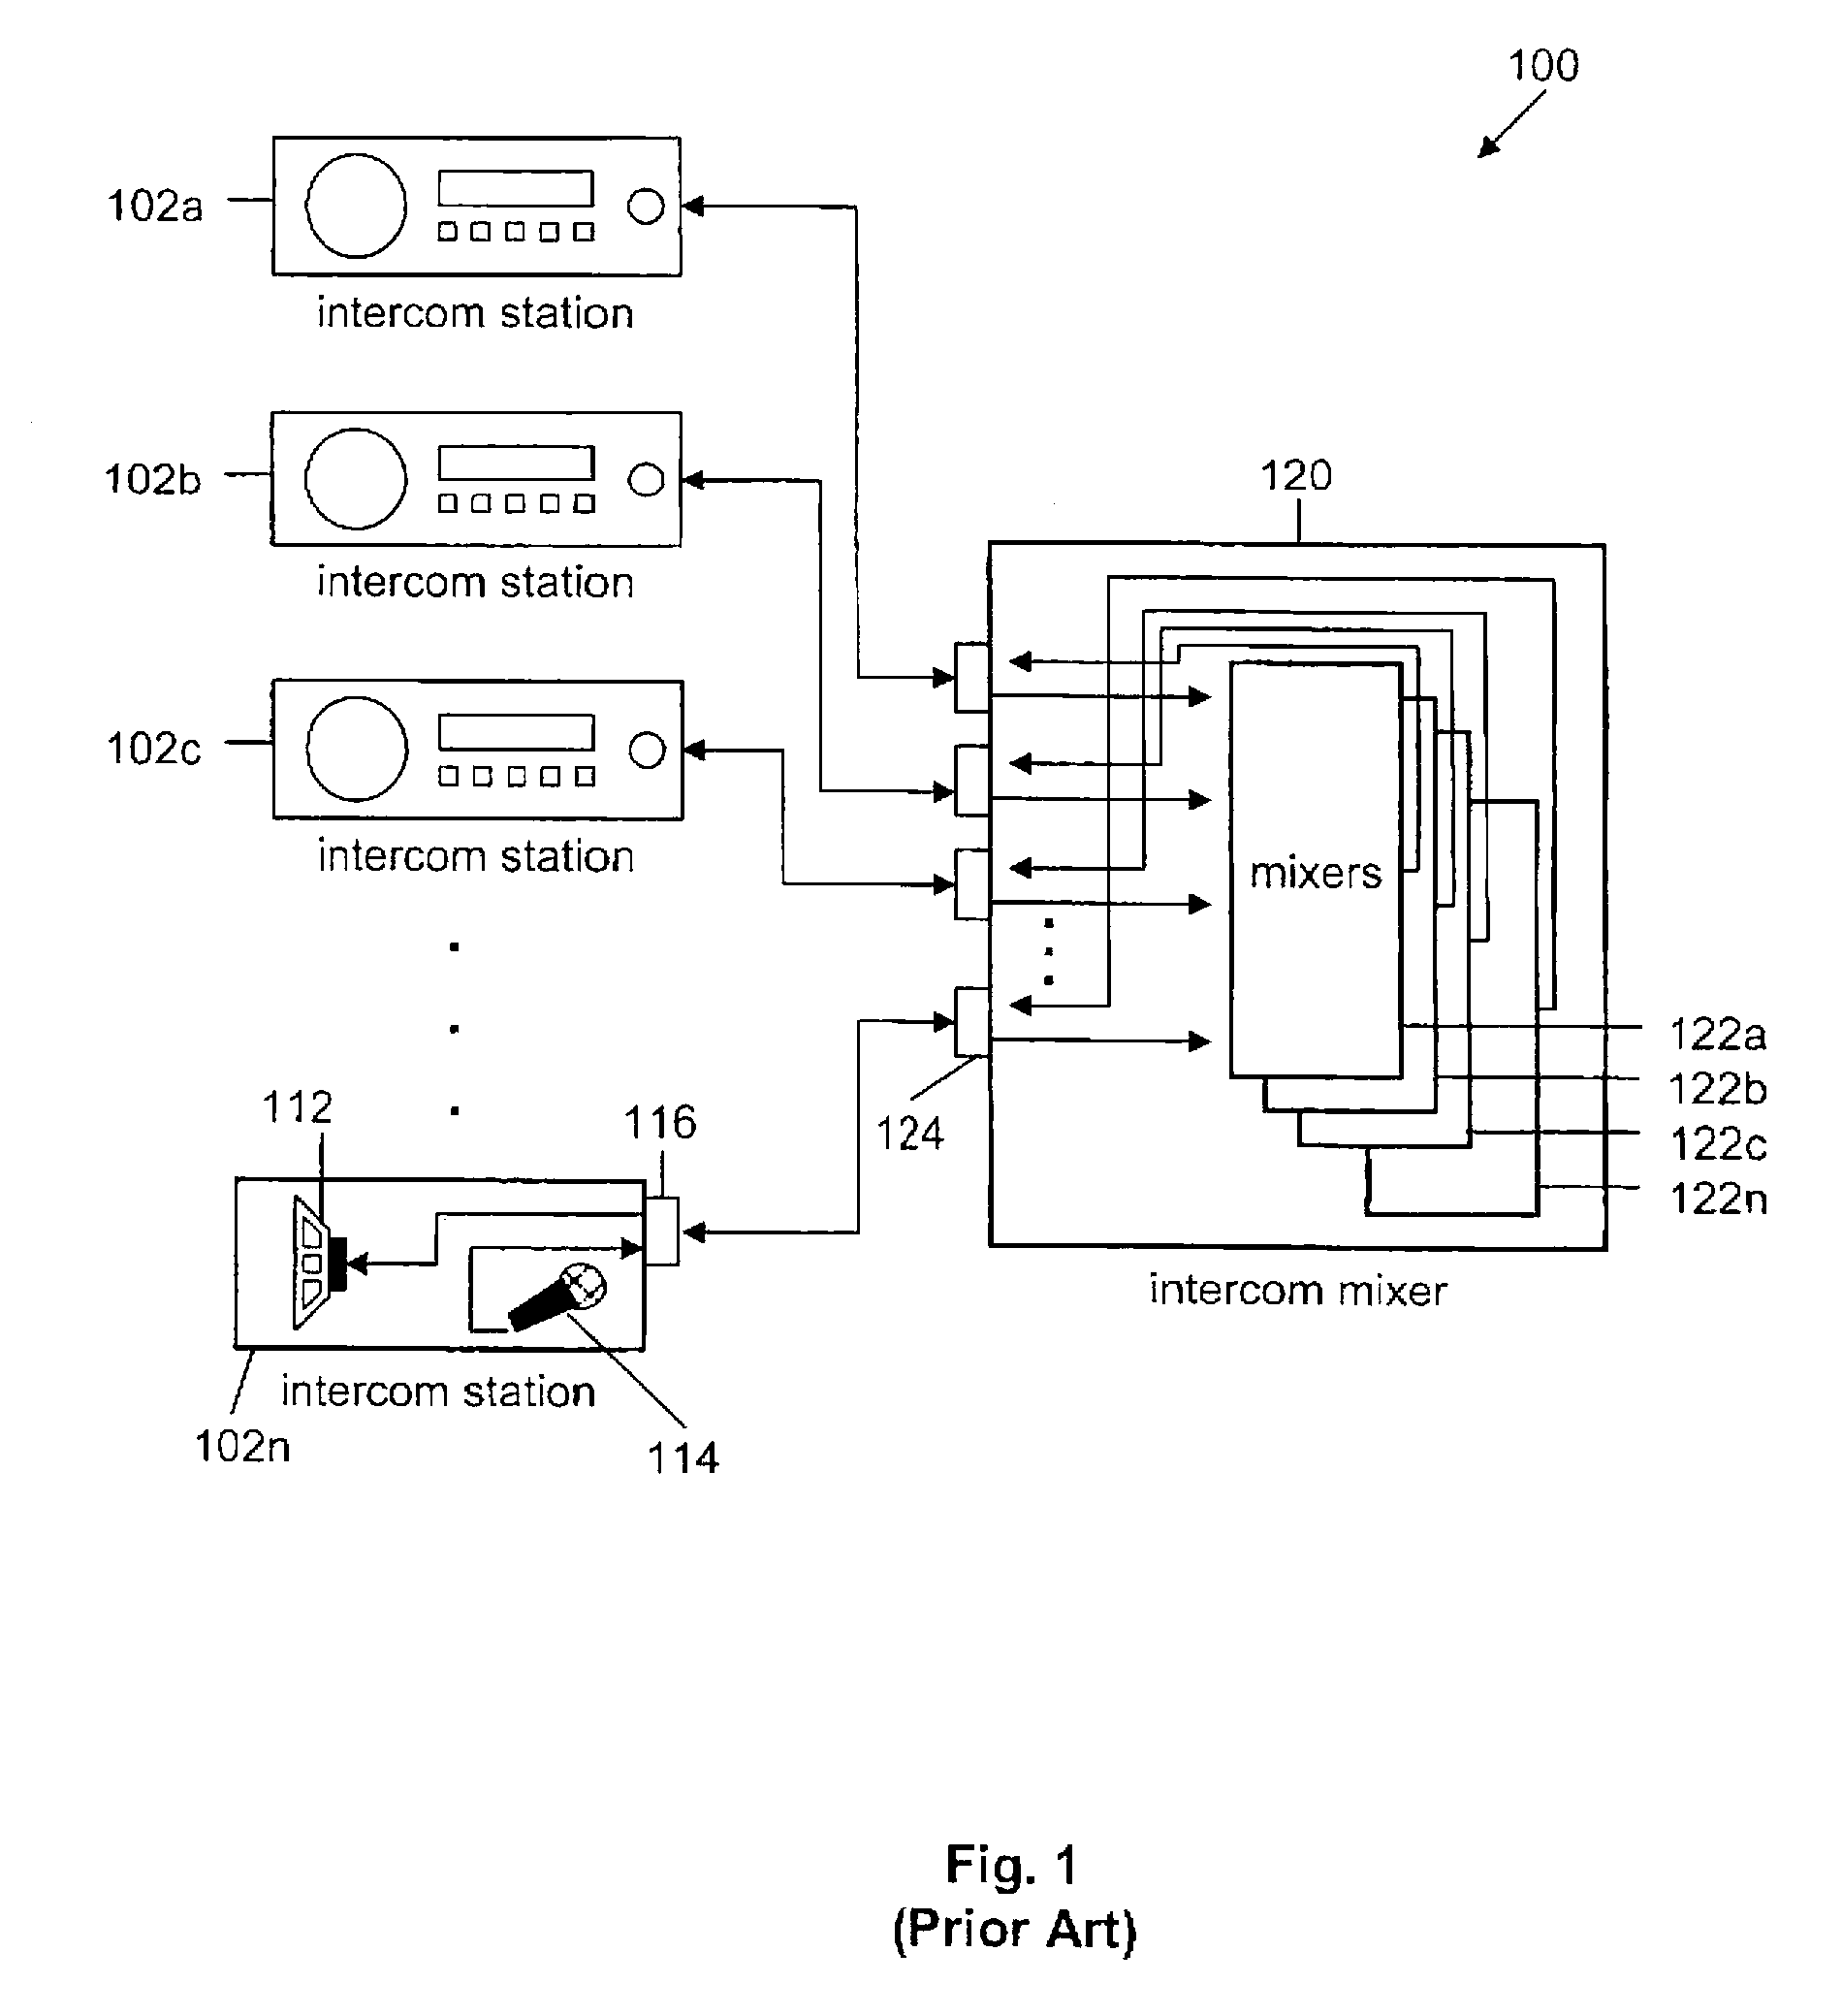 Scalable, distributed architecture for fully connected network intercom system